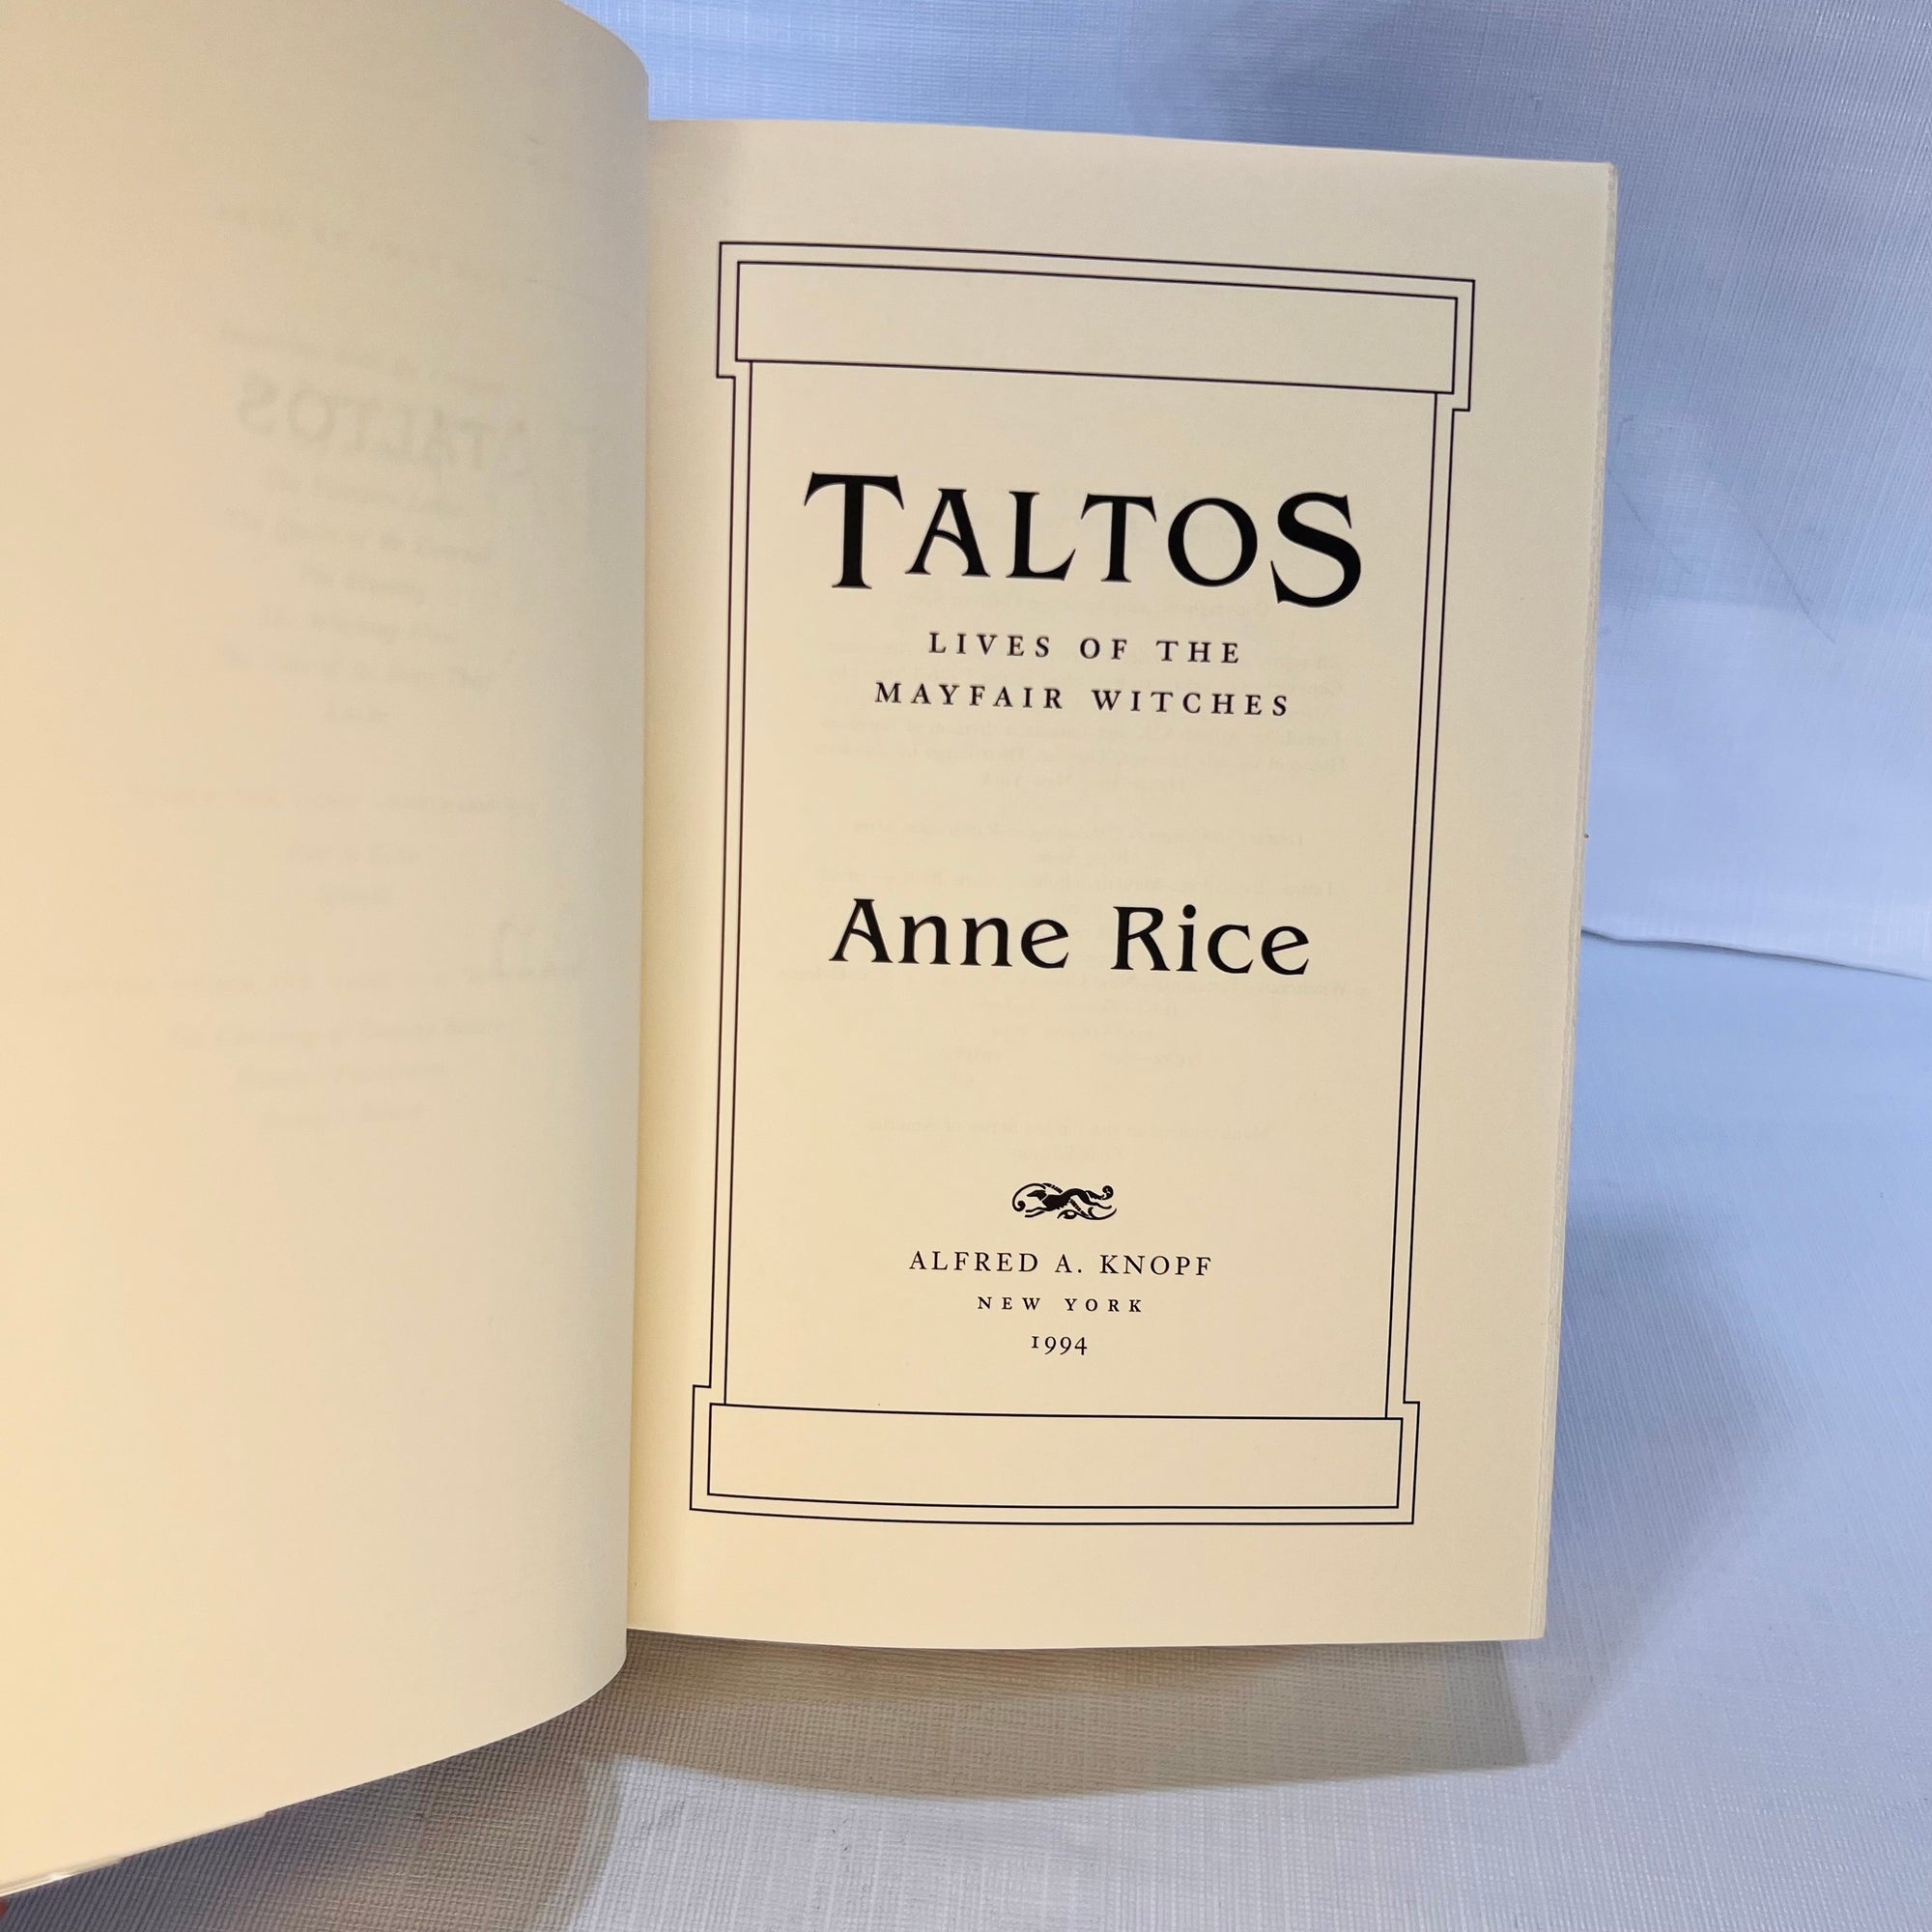 Taltos Lives of the Mayfair Witches by Anne Rice 1994 First Edition Alfred A. Knopf